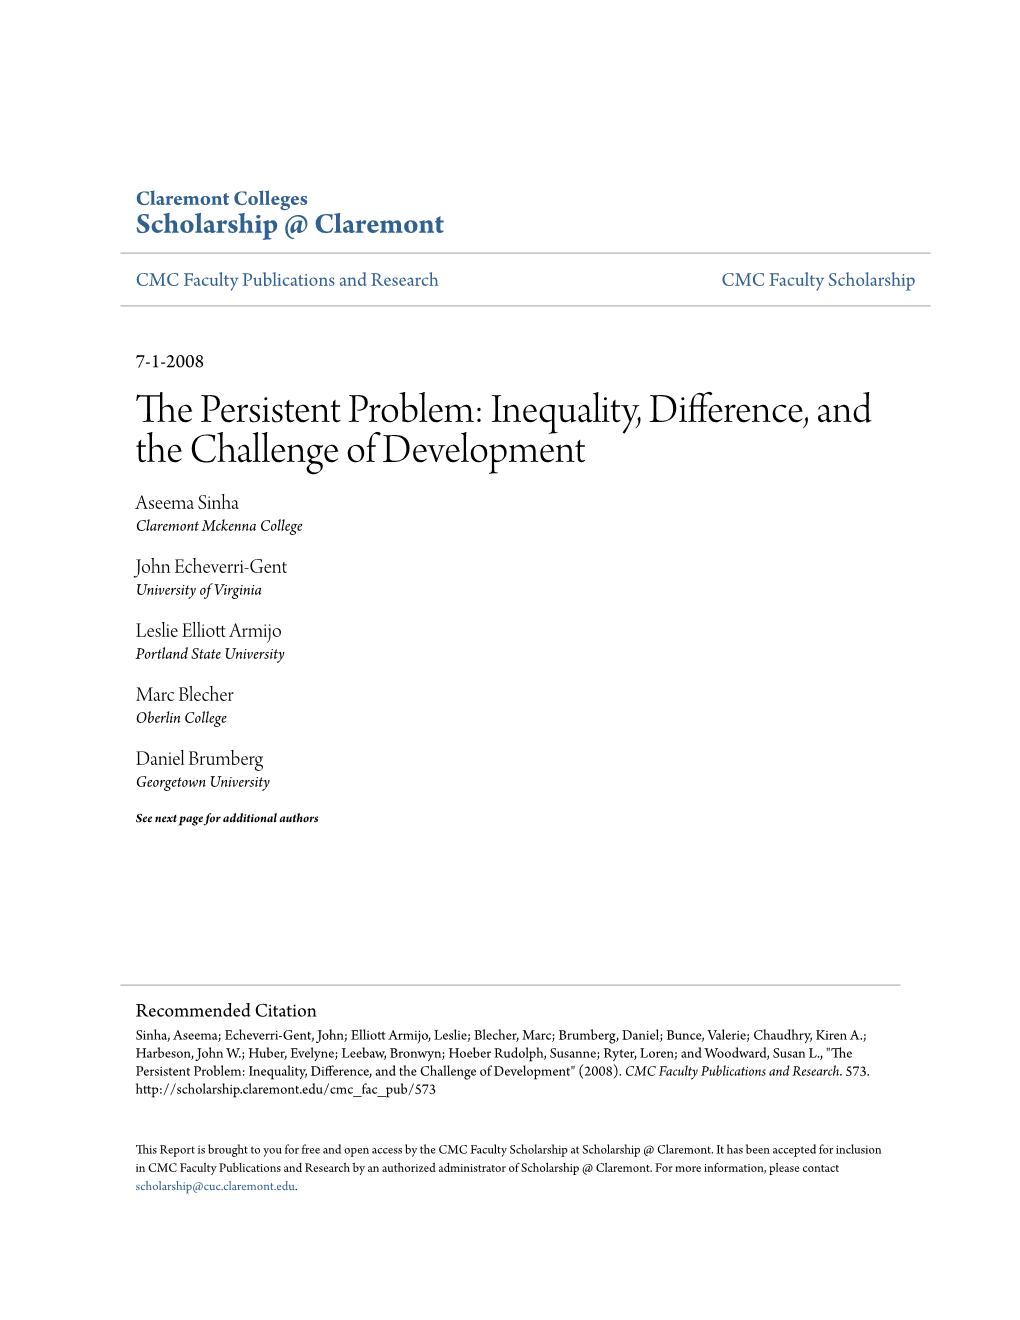 The Persistent Problem: Inequality, Difference, and the Challenge of Development" (2008)